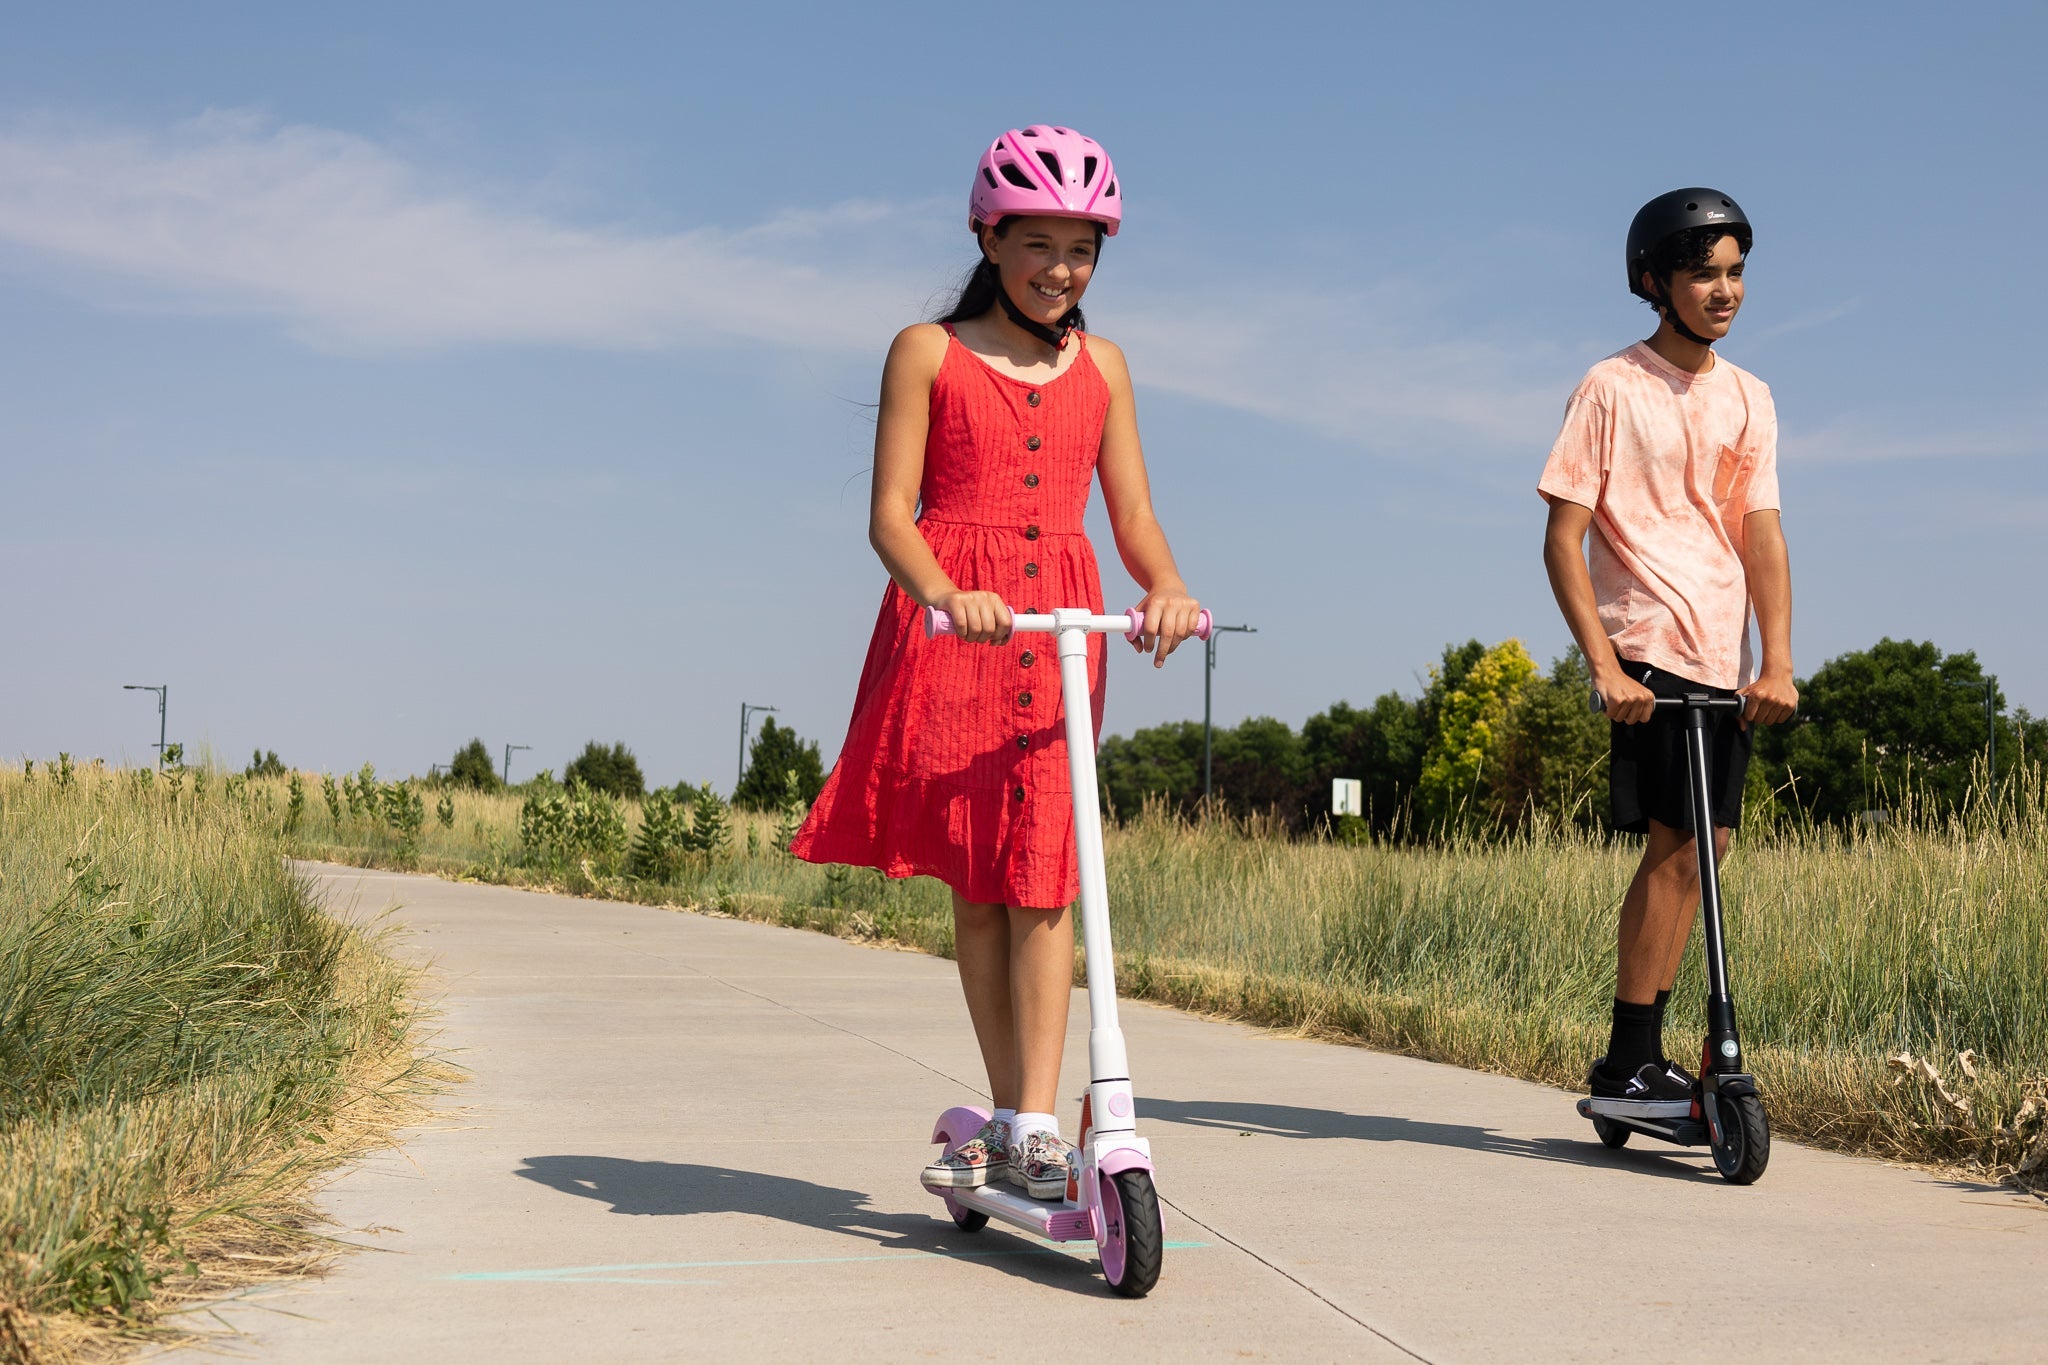 The Top 3 Electric Scooter for Kids - GOTRAX